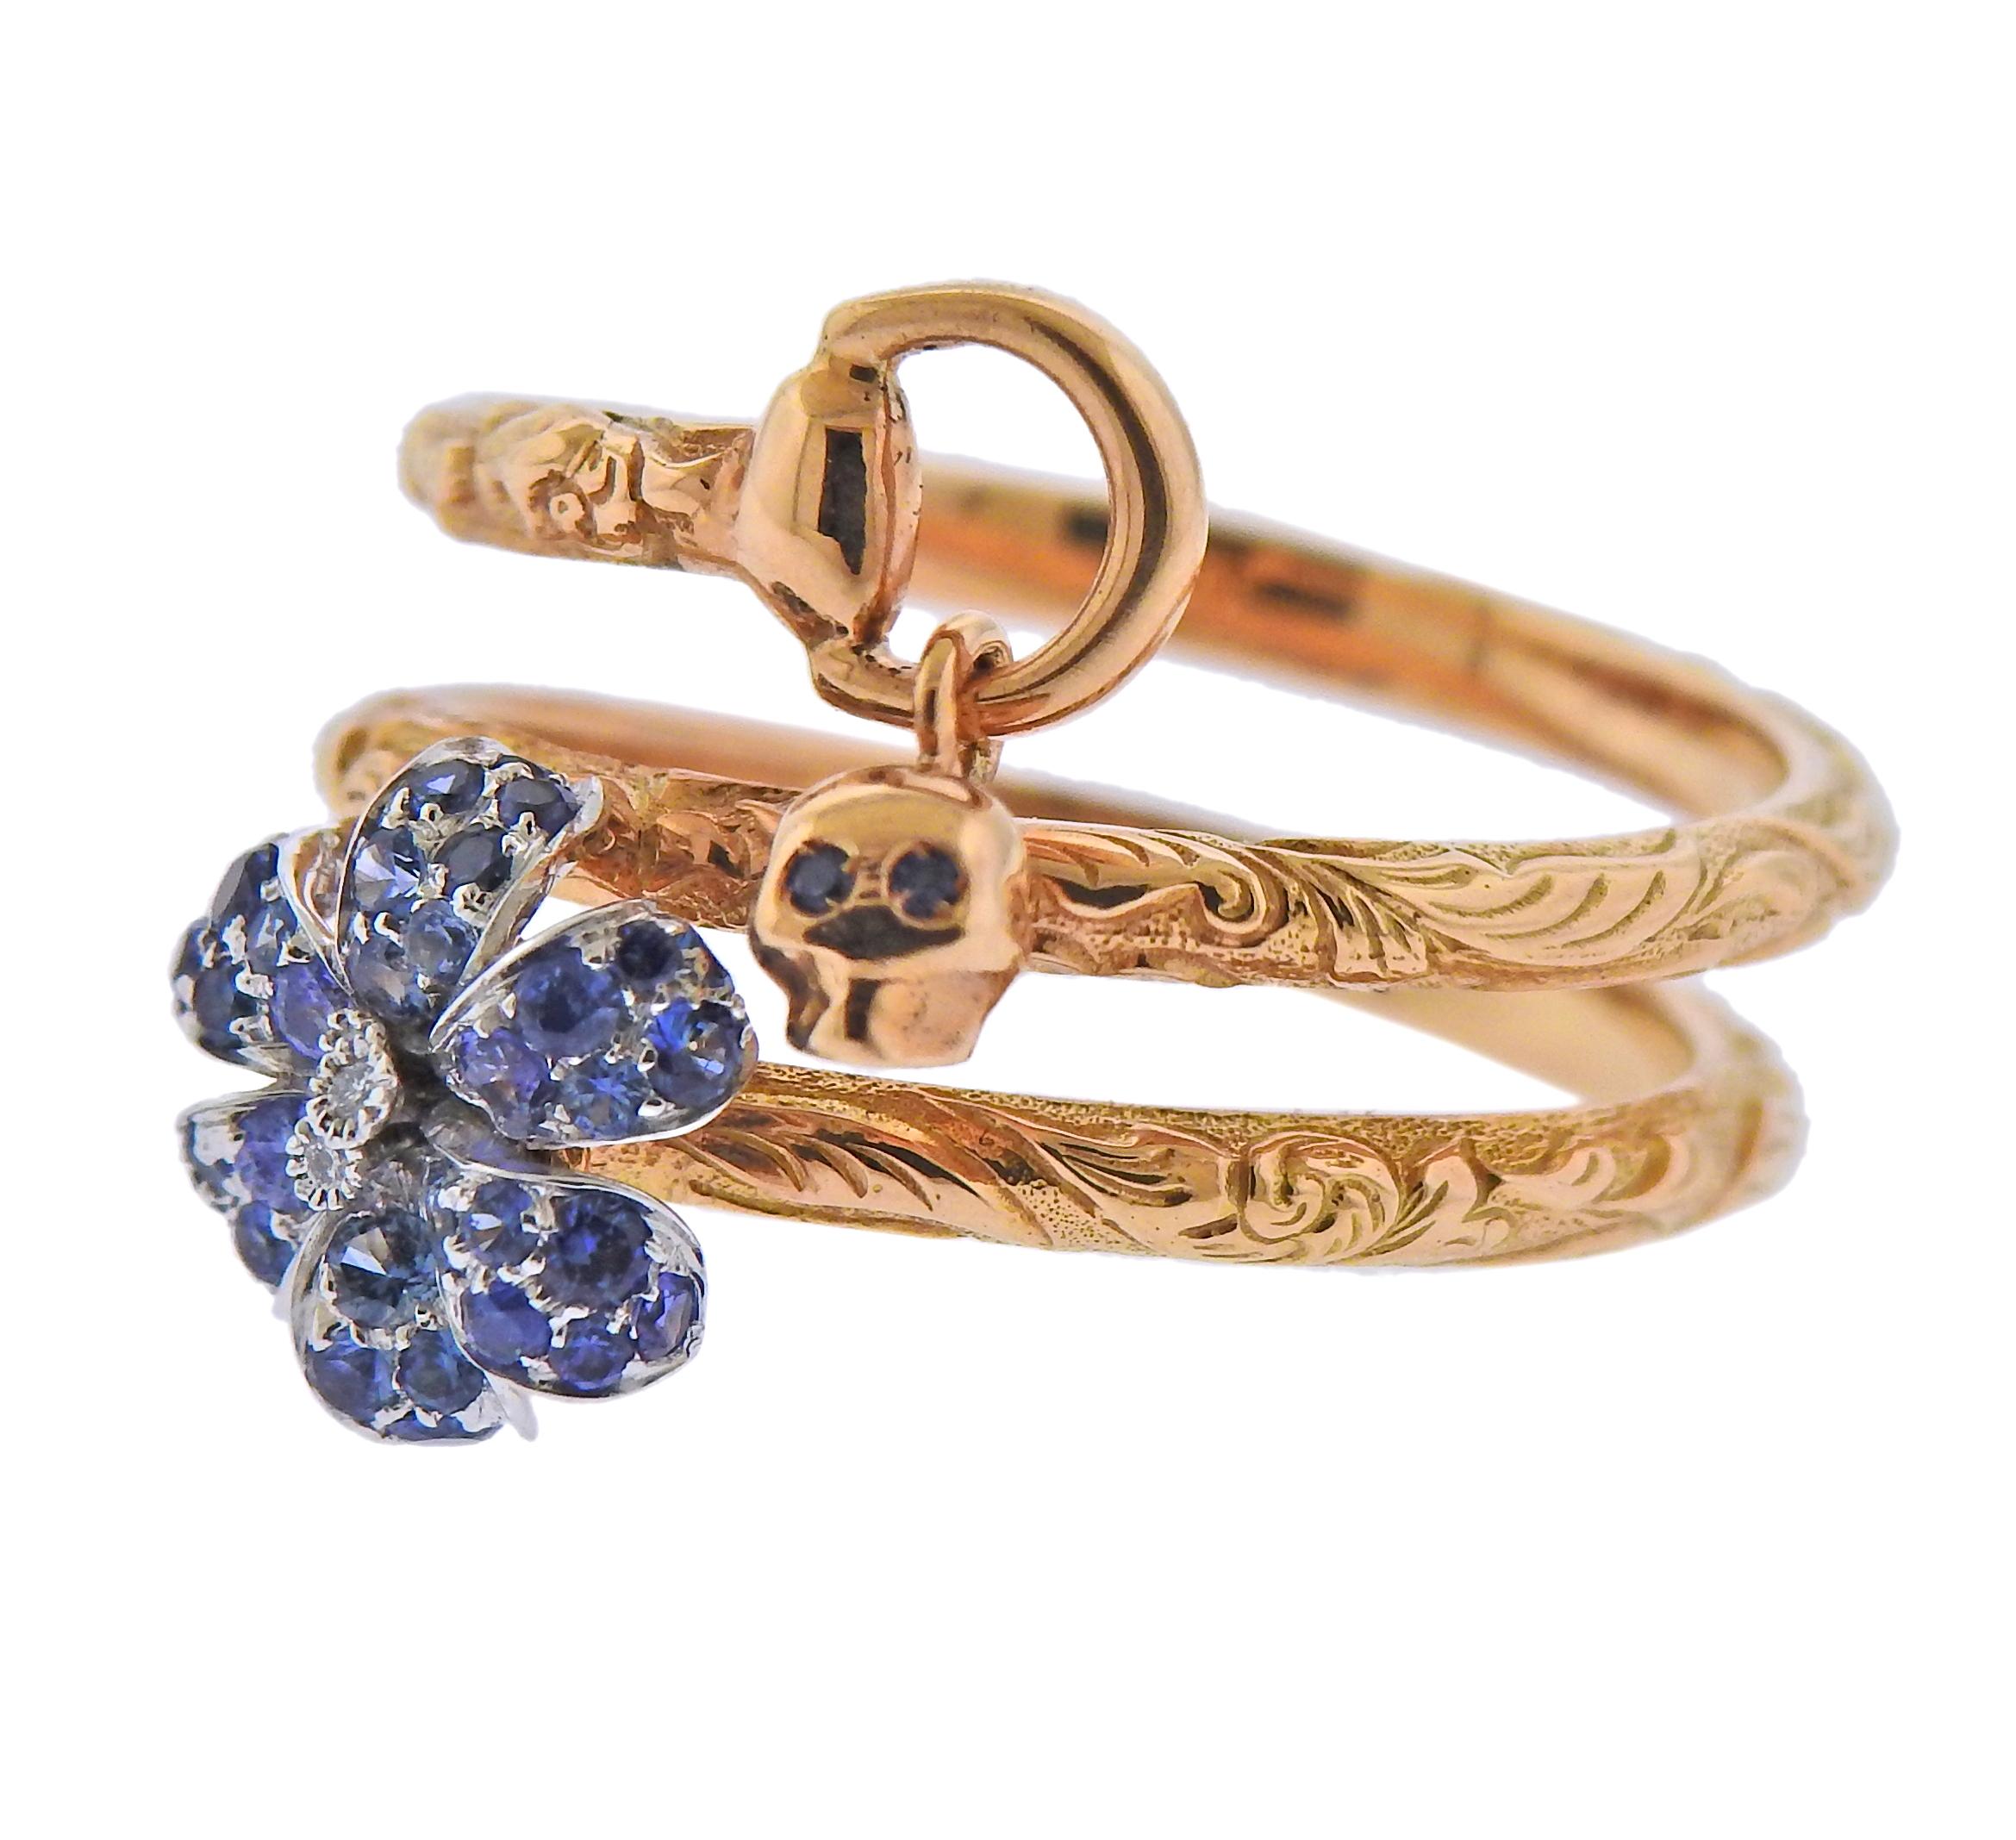 New Gucci Flora flower ring in 18k rose gold, with sapphires and approx. 0.02ctw in G/VS diamonds. Ring size - 6.75, ring is 22mm wide.  Weight - 6.9 grams. Marked: Au750, Gucci, made in Italy. 